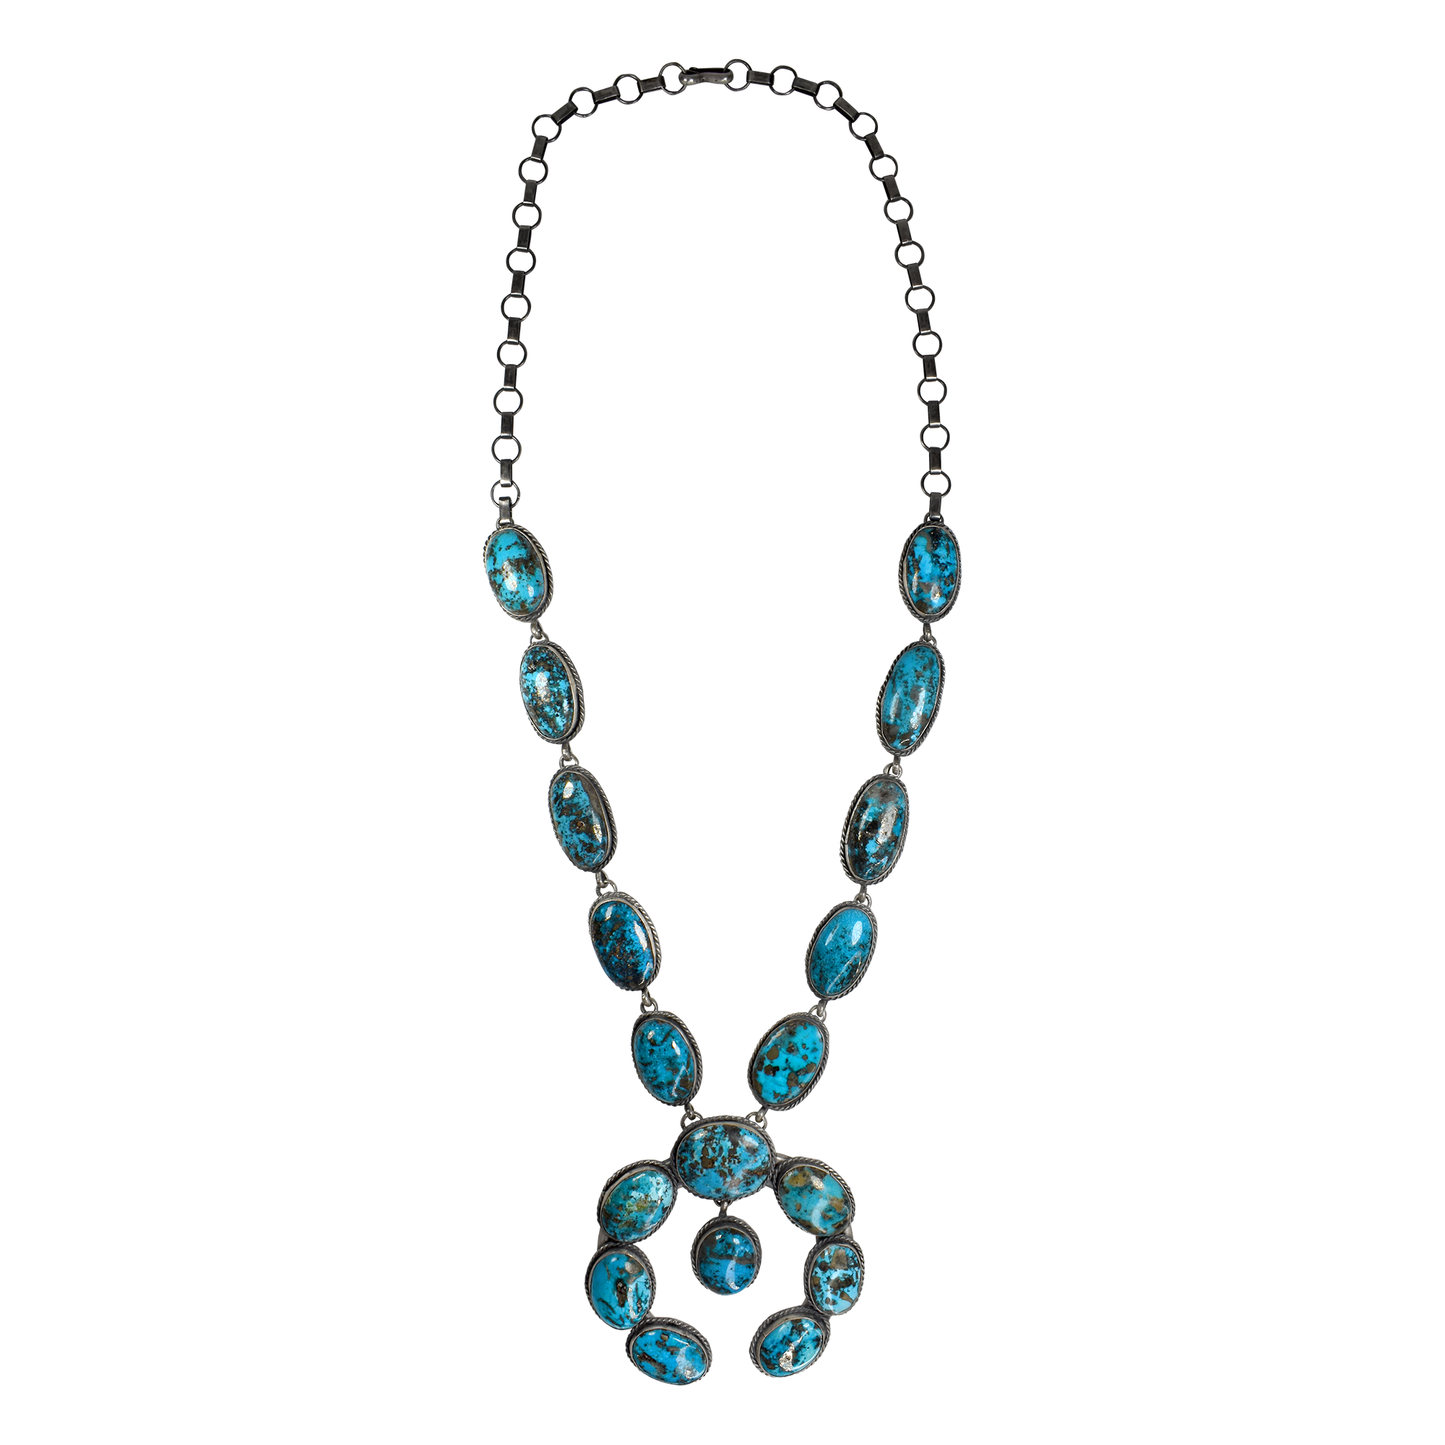 High Grade Natural Persian Turquoise Squash Blossom Necklace by Gilbert Nez